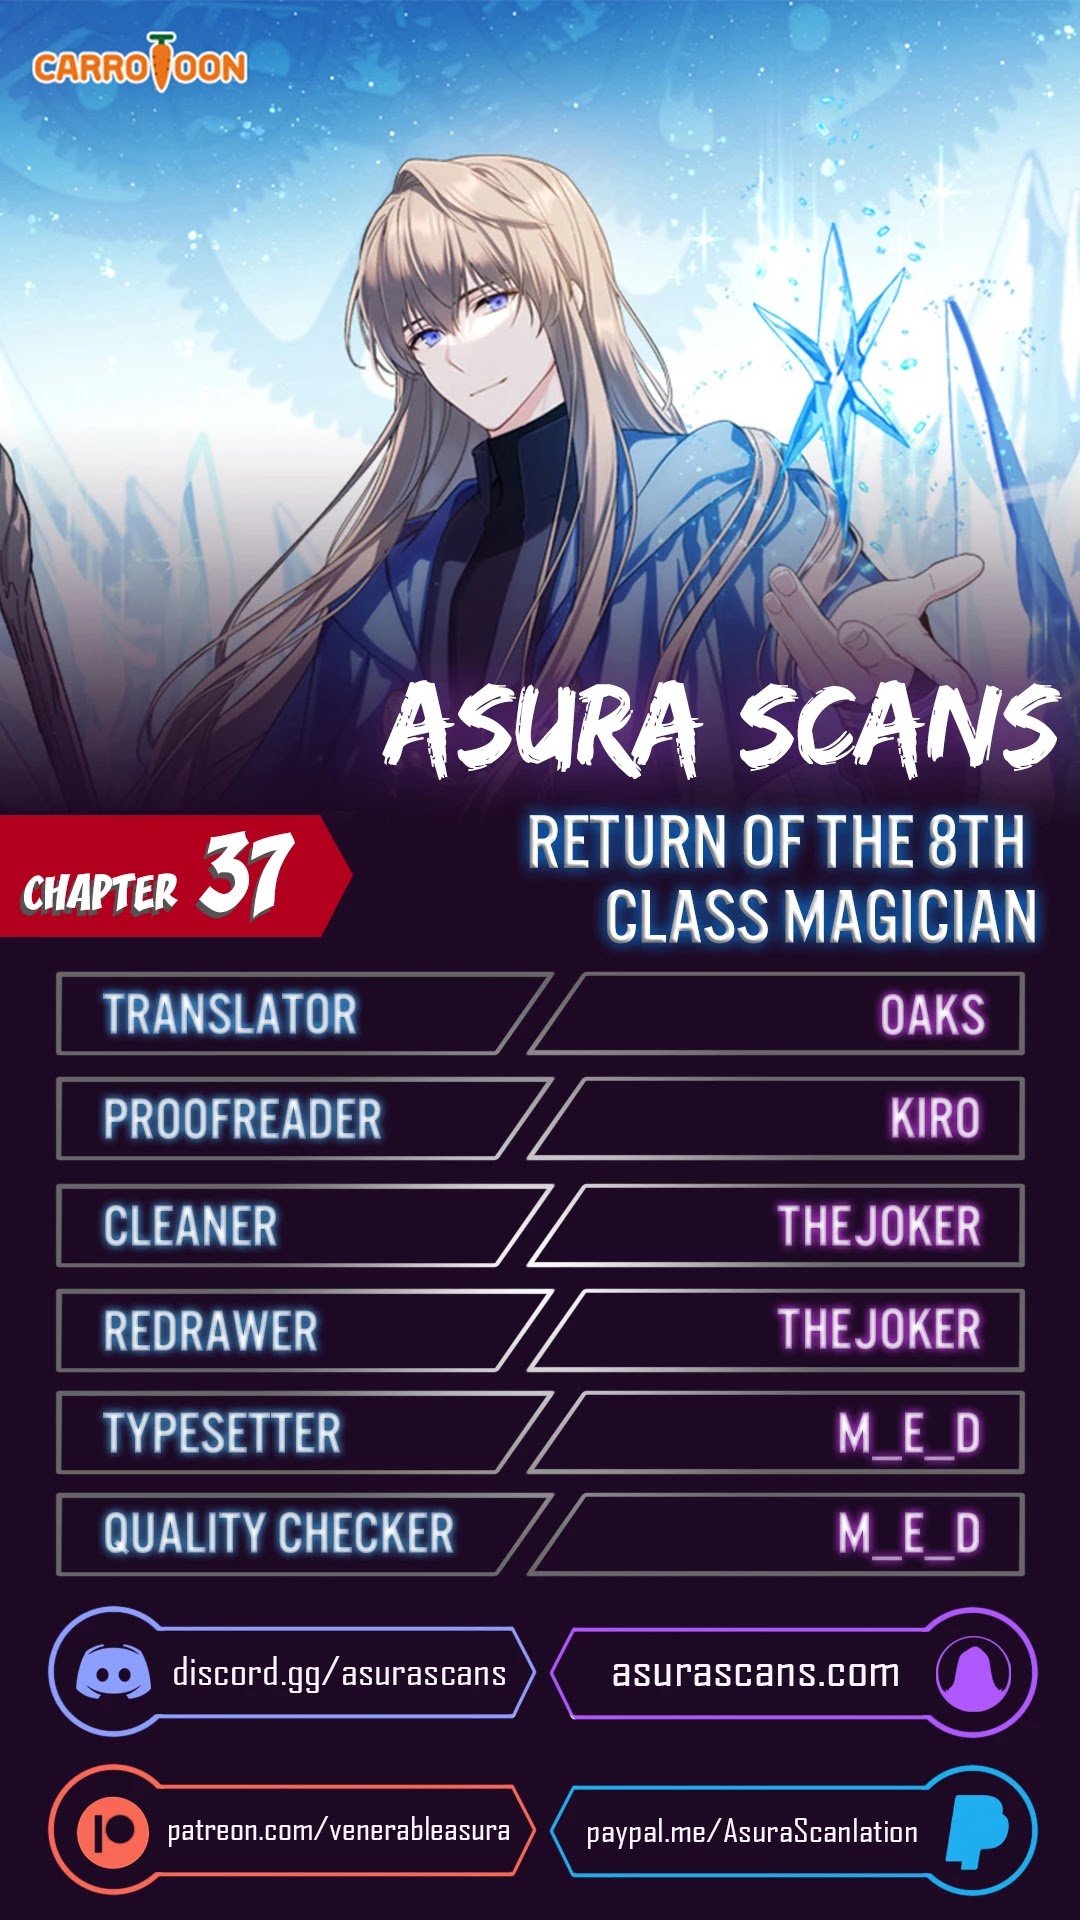 Return of the 8th class Magician chapter 37